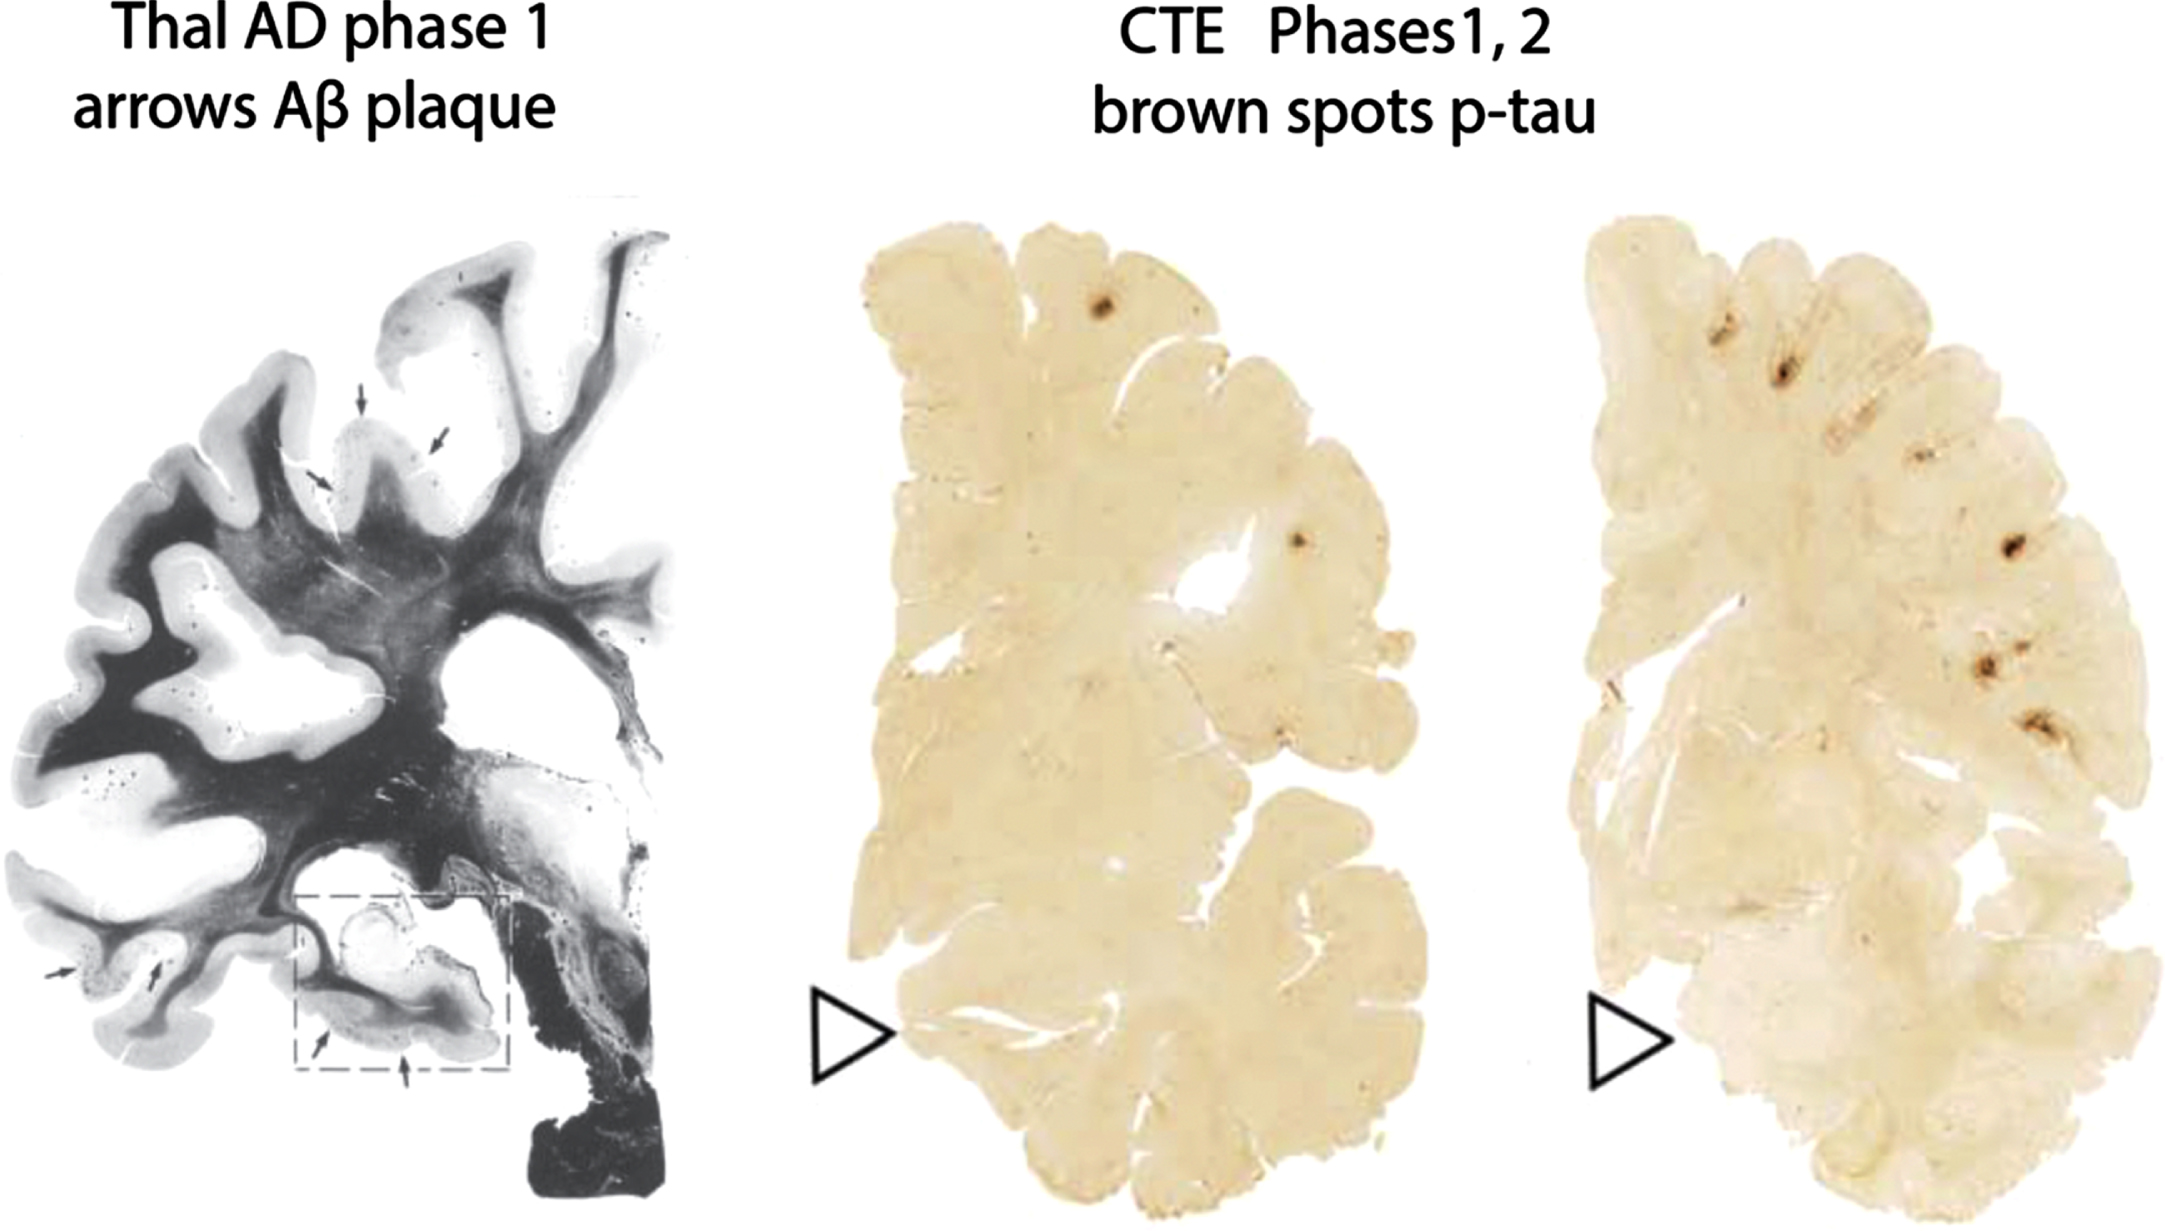 Earliest cortical pathological stages in AD (left) and CTE (right two images) phase 1 AD Aβ plaque pathology is noted by black arrows primarily in sulci. (There is no early cortical tau pathology in AD.) CTE tau pathology on the right is result of p-tau staining. (There is no CTE Aβ pathology other than that from coexisting CTE and AD). Sources: left [107] with permission; right two [91] with permission.